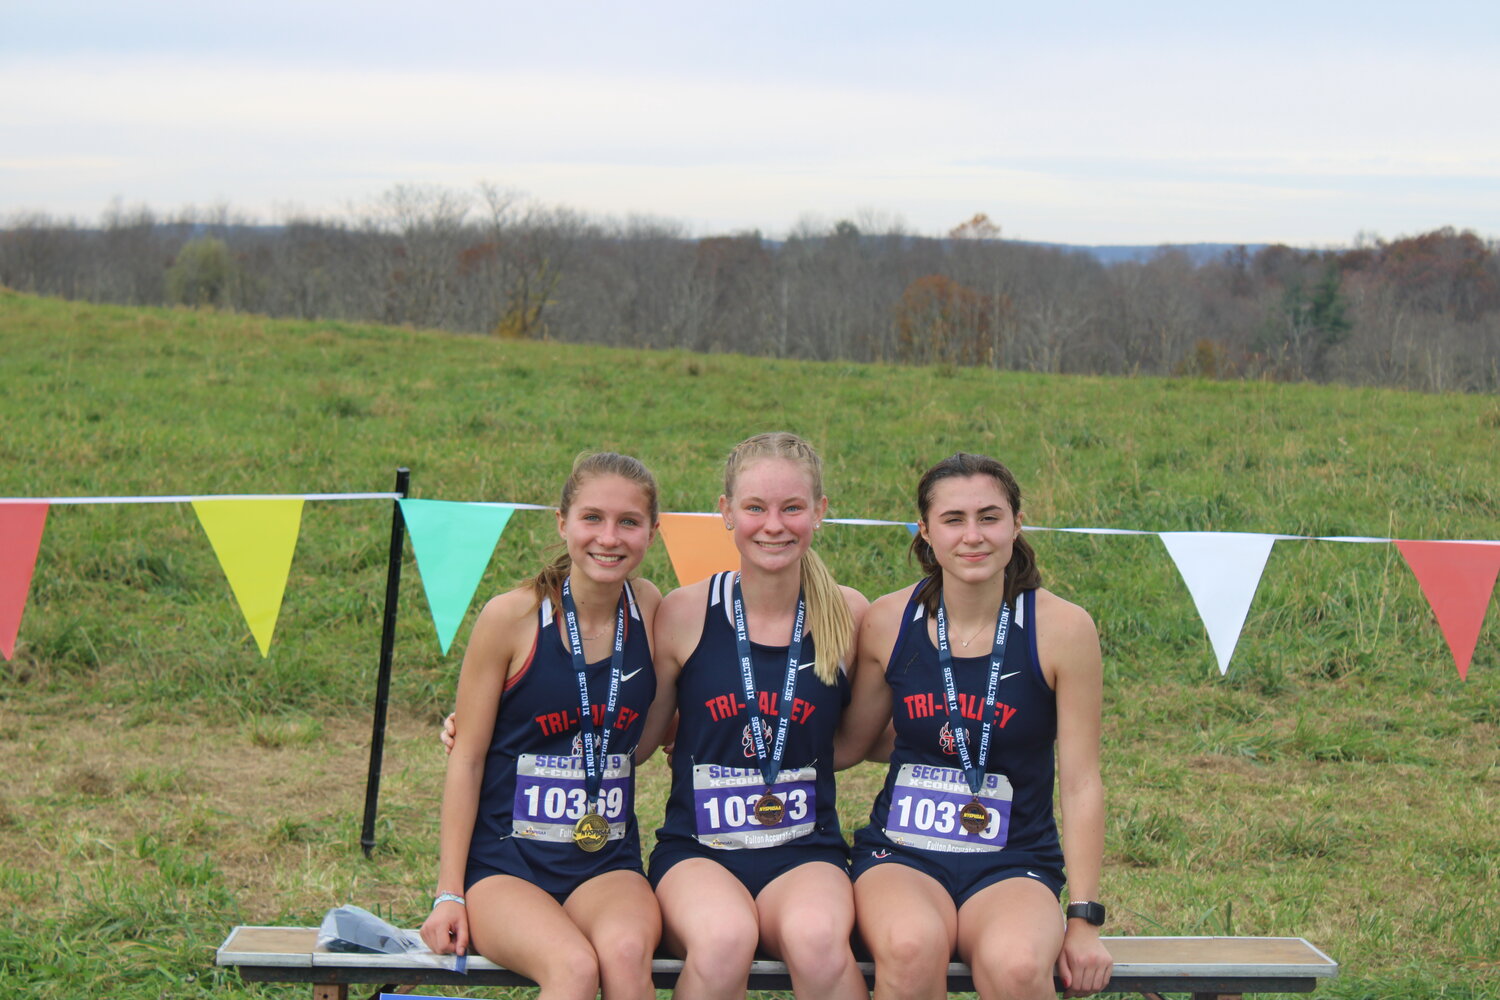 Representing Tri-Valley at States for the girls will be, from left to right, Anna Furman, Amelia Mickelson and Em Richardson.